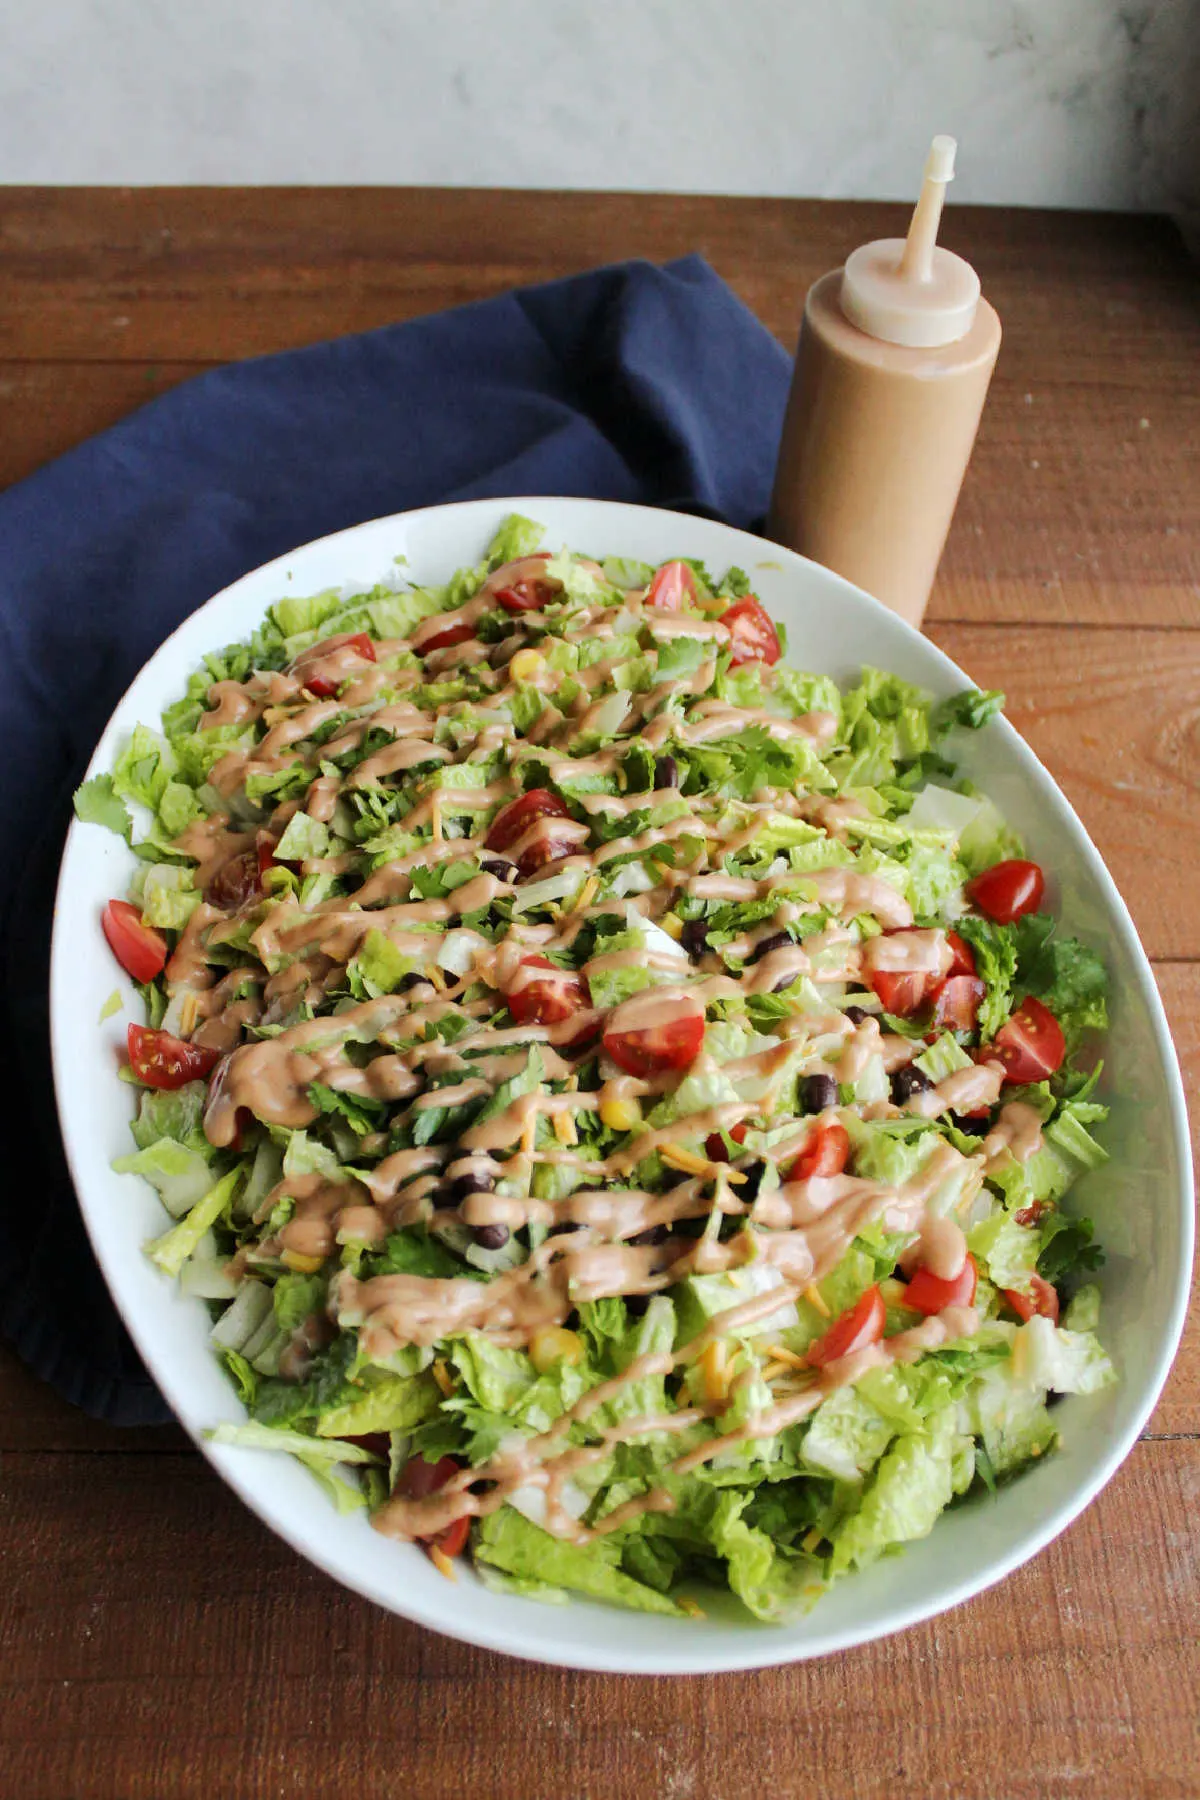 Cowboy salad topping tossed with lettuce and topped with drizzled creamy bbq dressing.